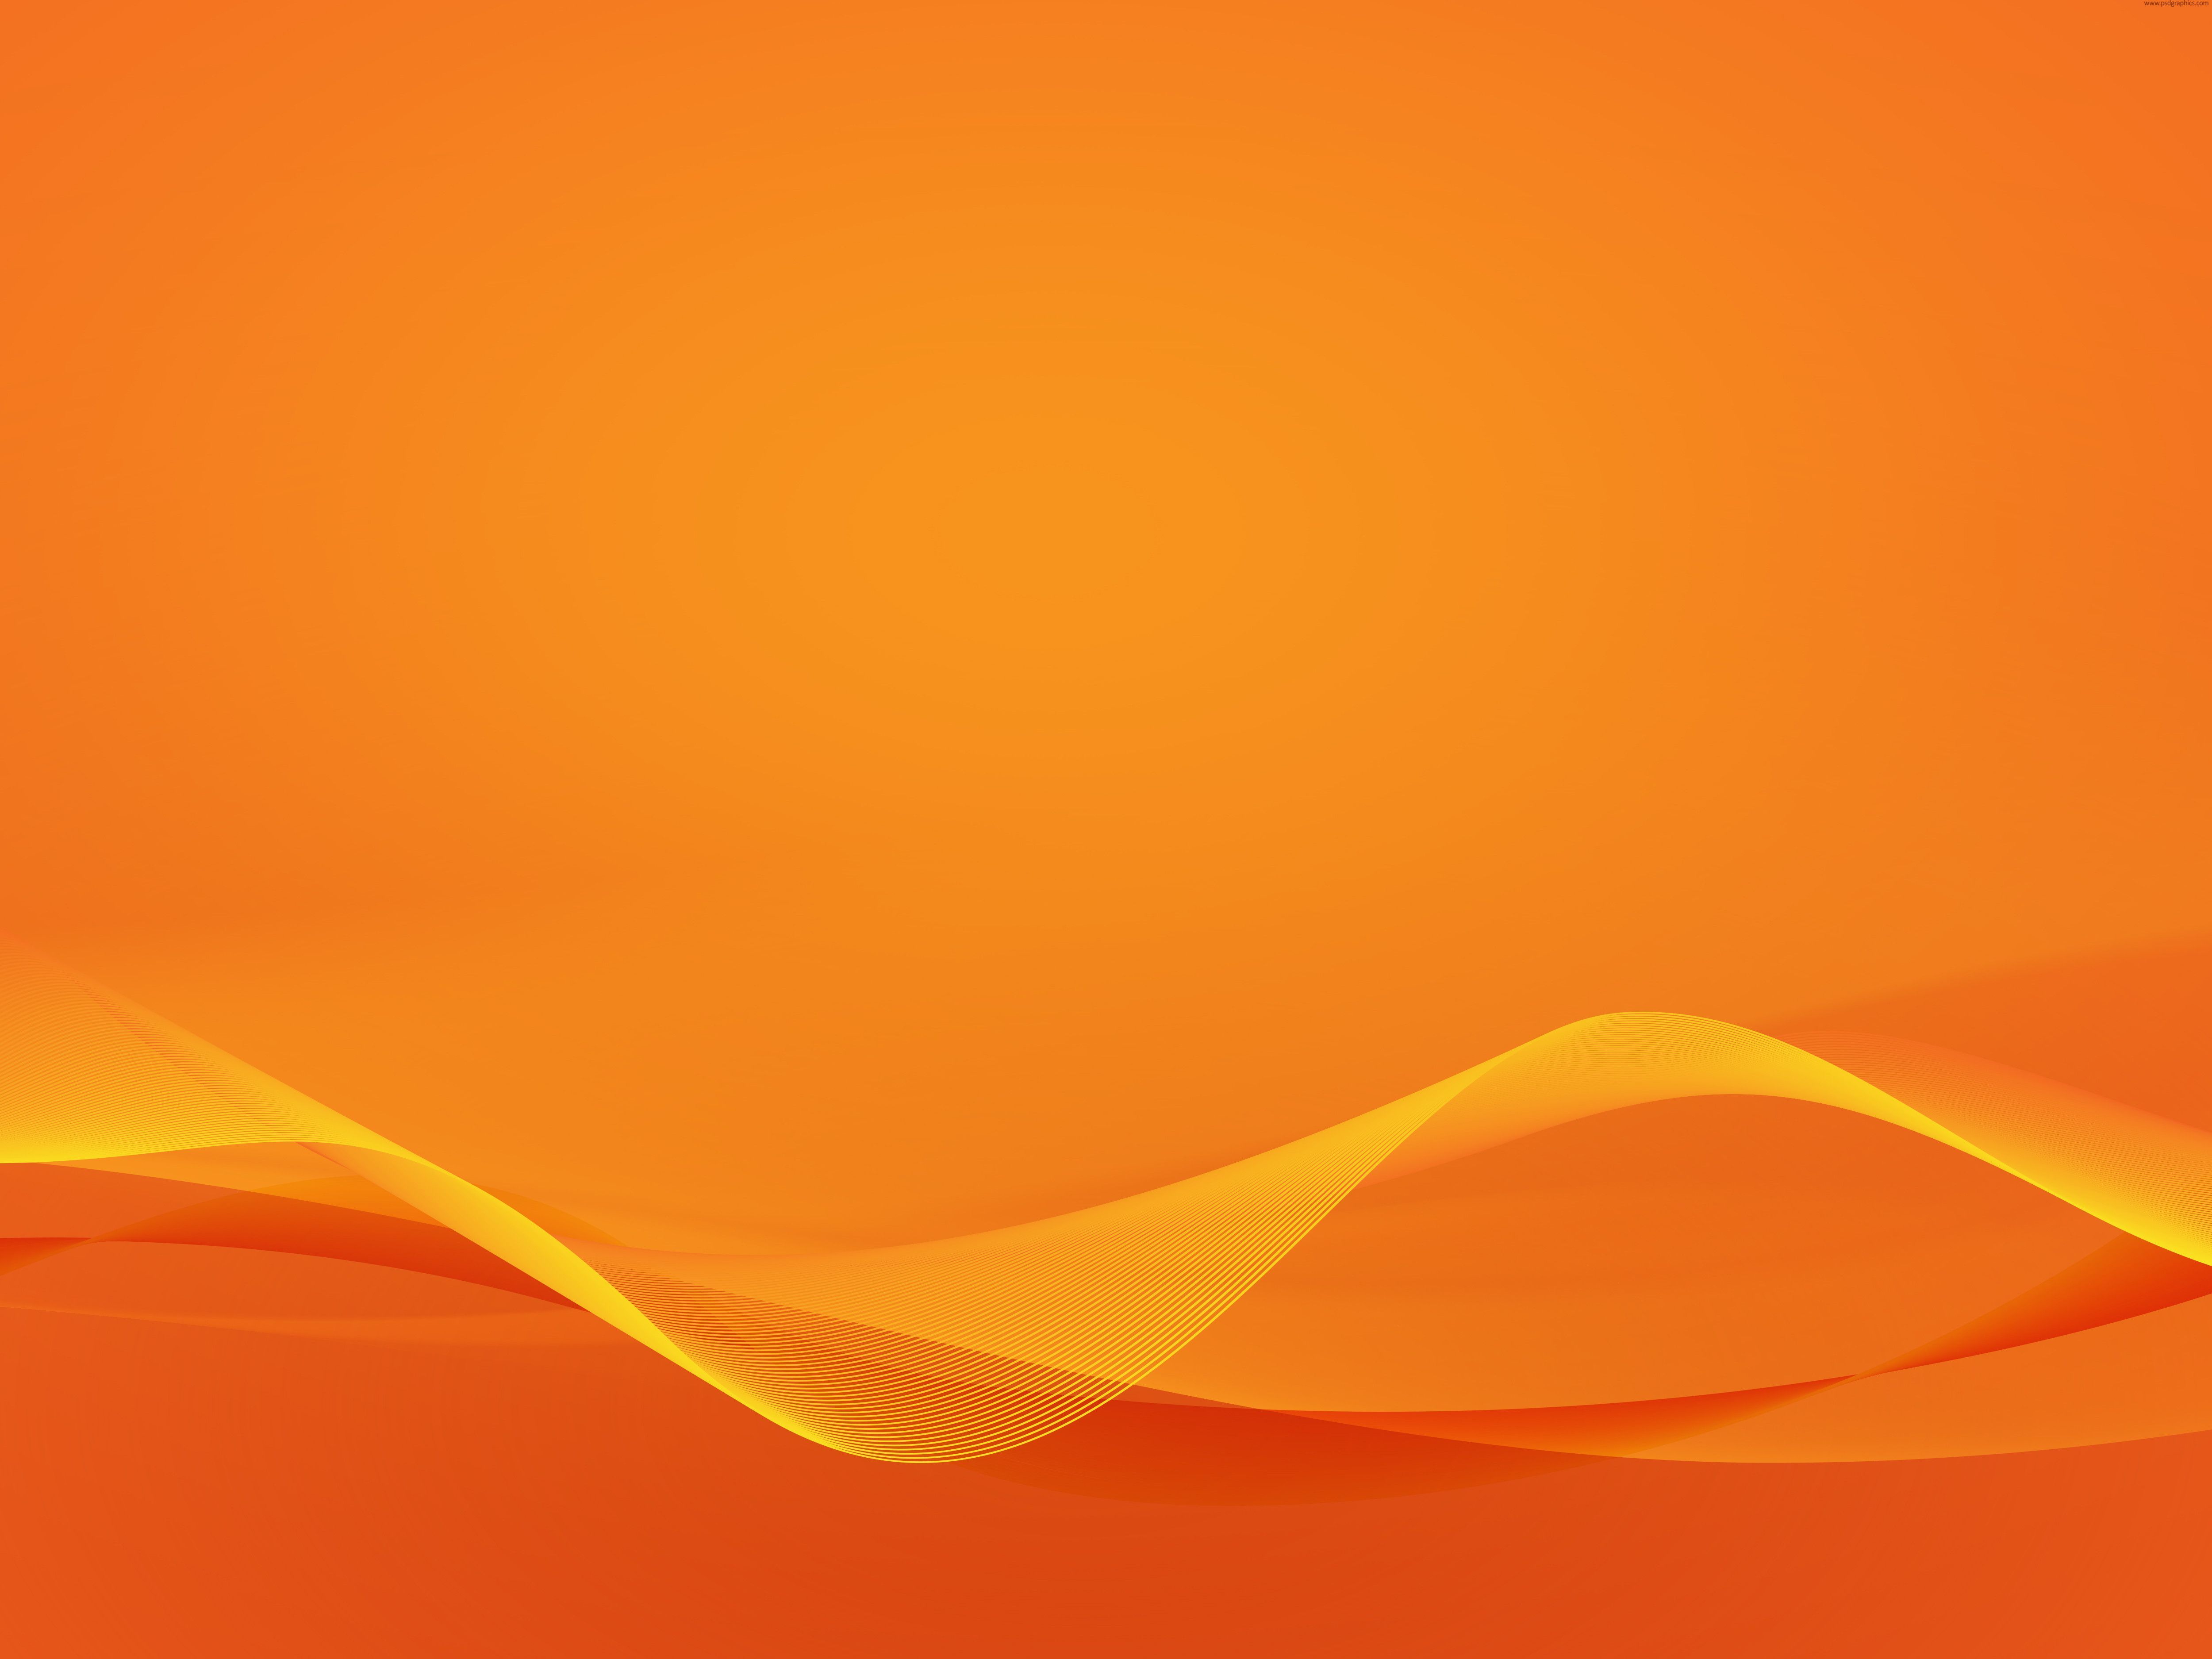 Orange Background Vectors Photos And Psd Files